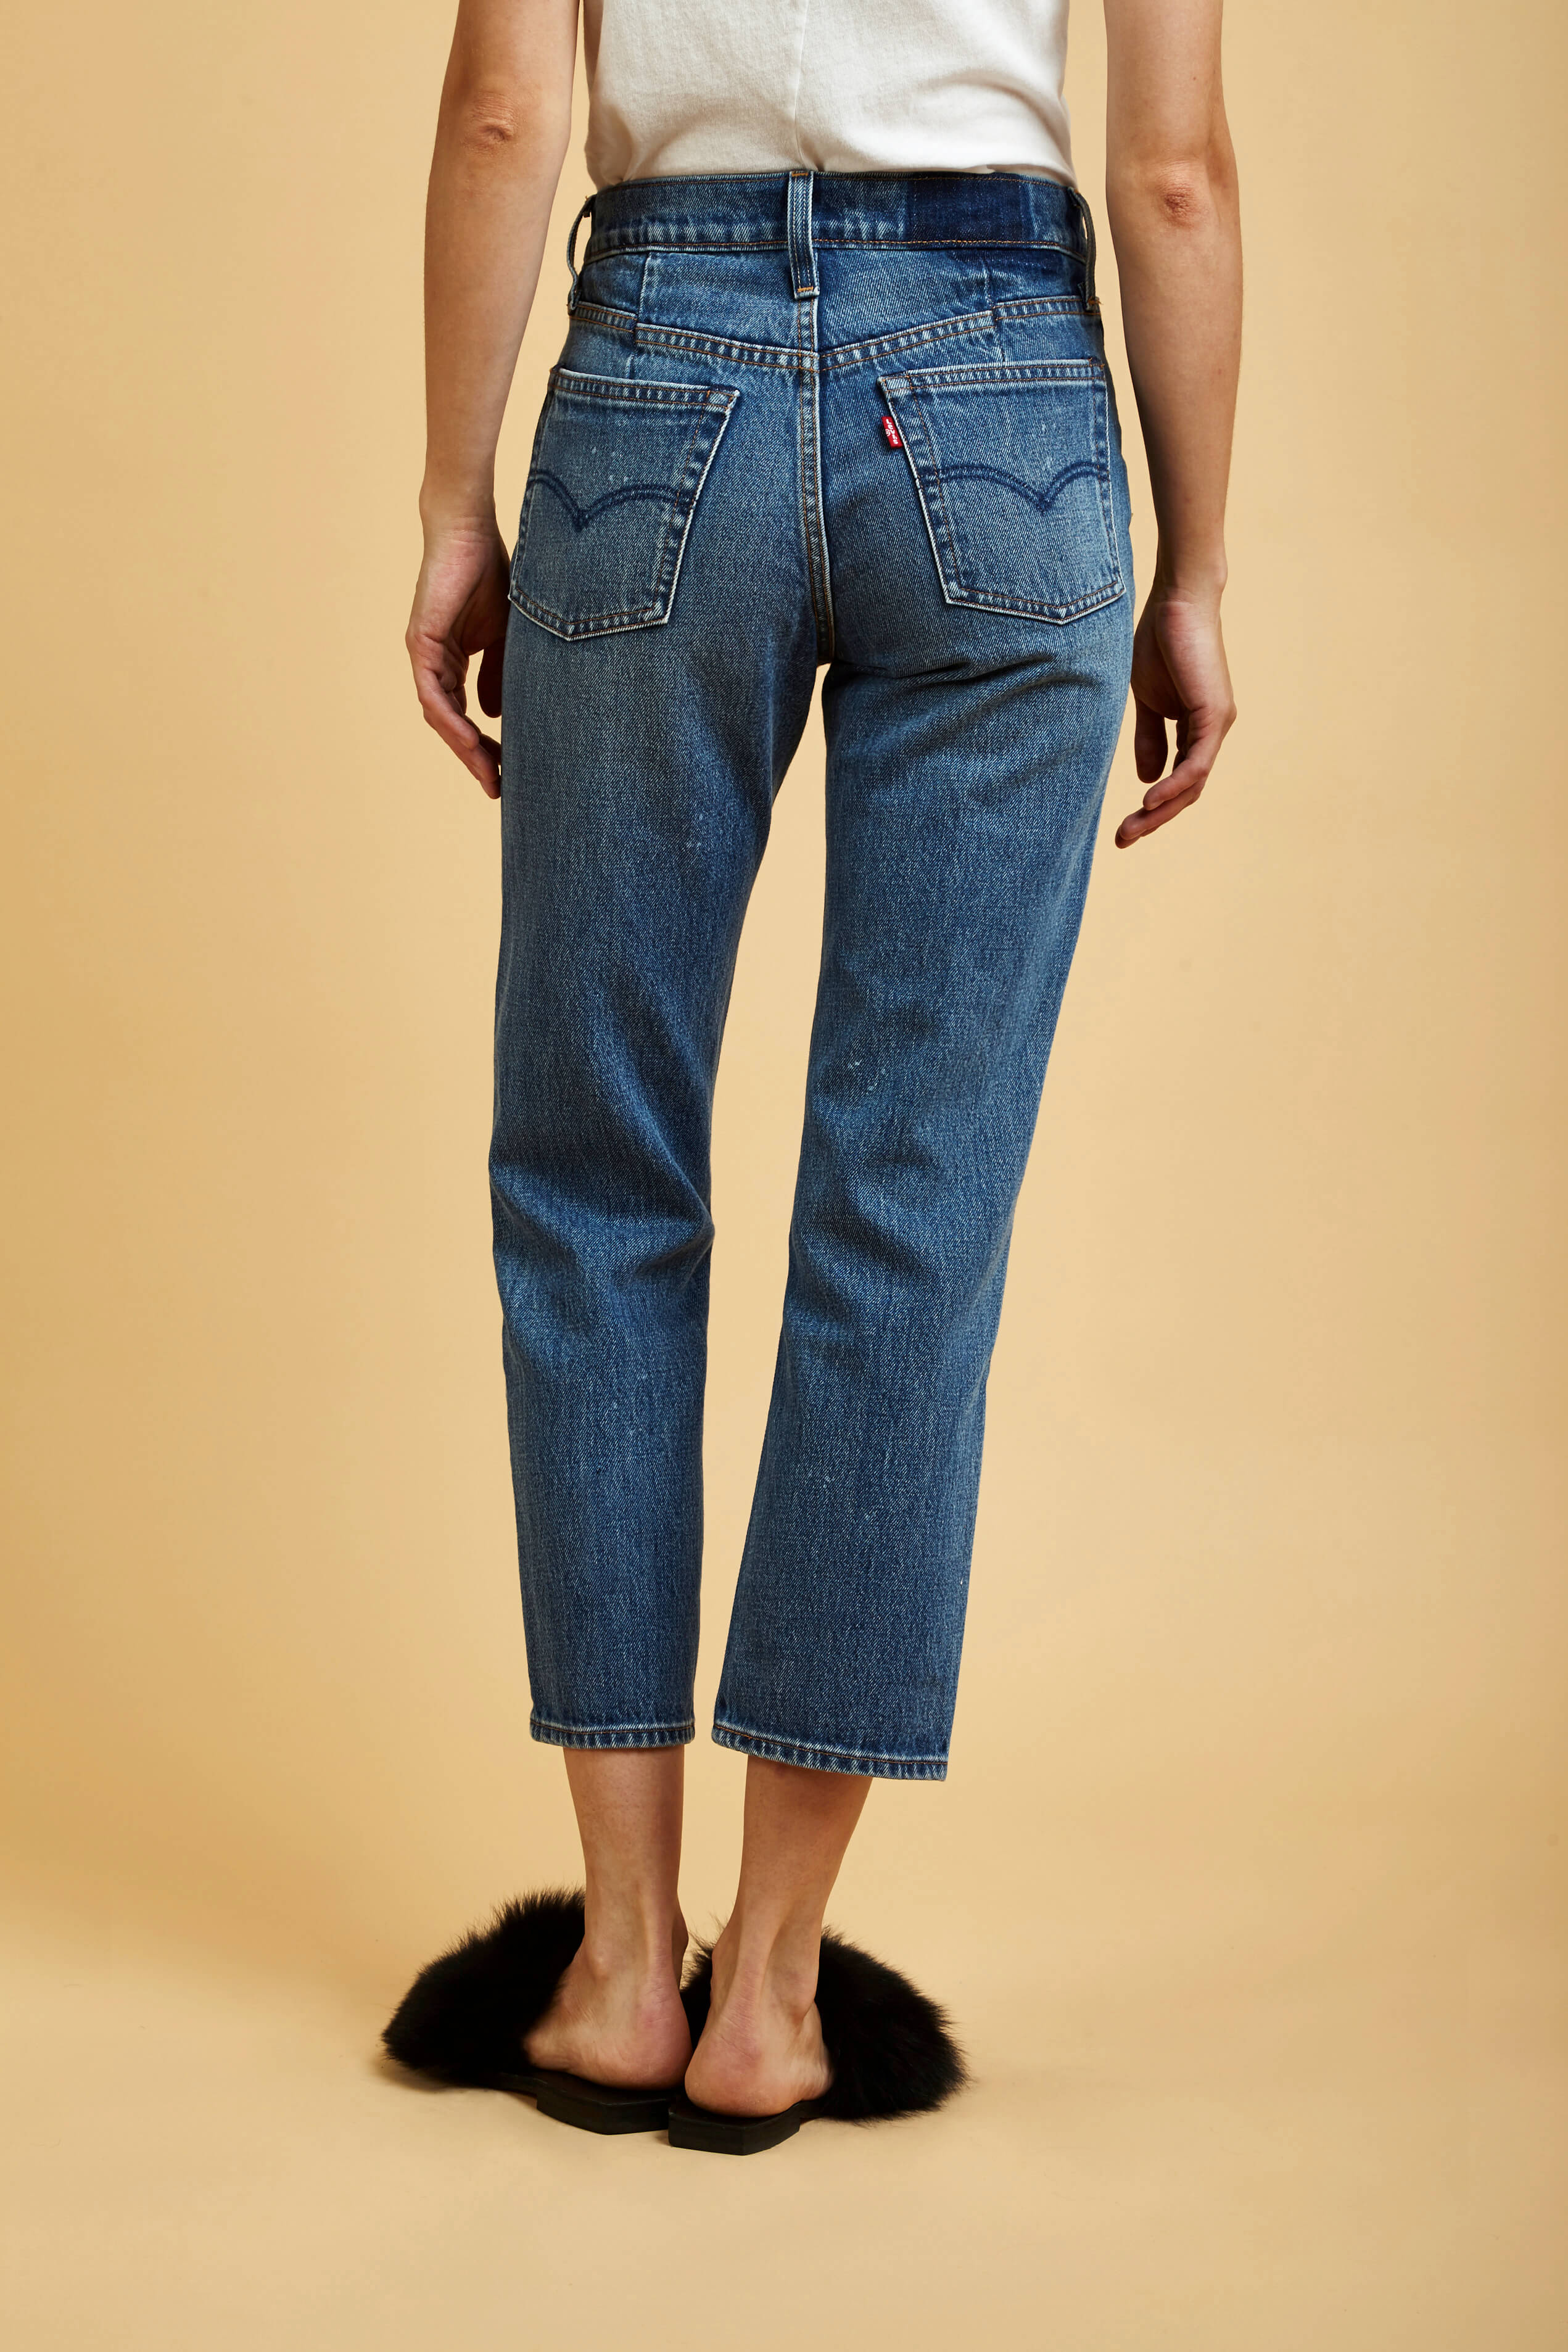 Levi's Waterless Altered Straight Jeans 